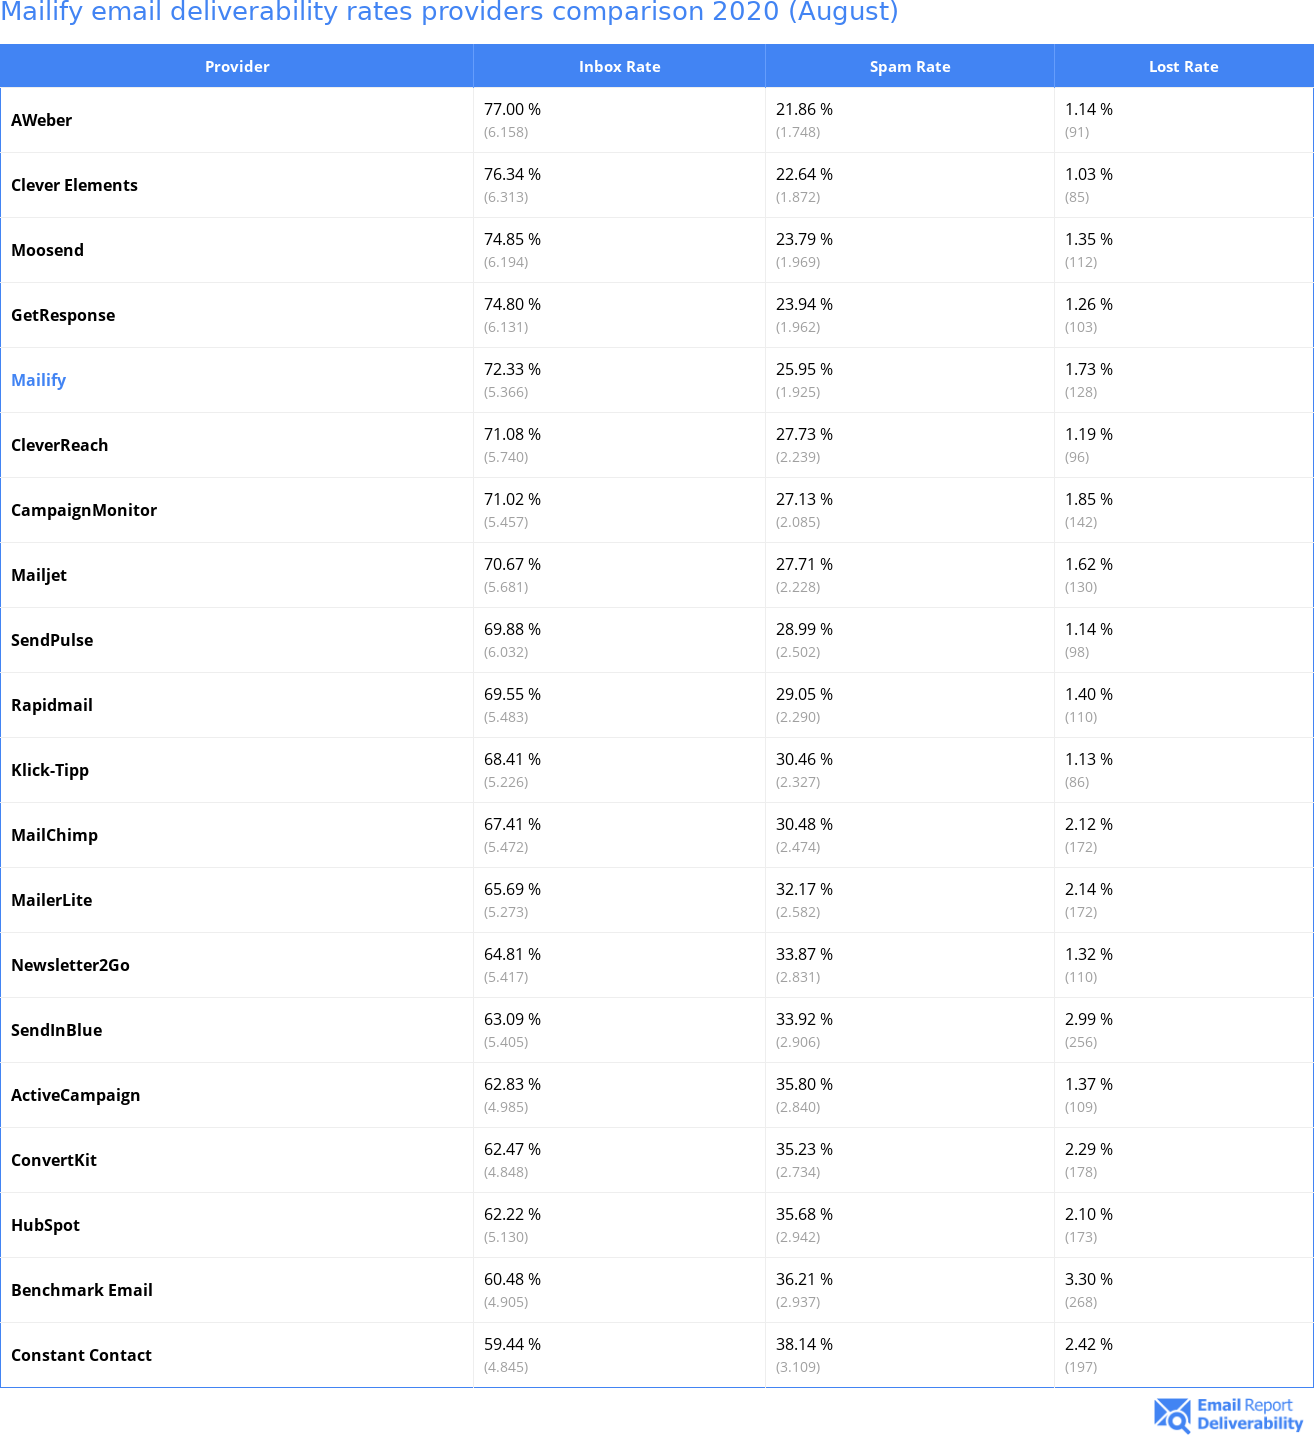 Mailify email deliverability rates providers comparison 2020 (August)